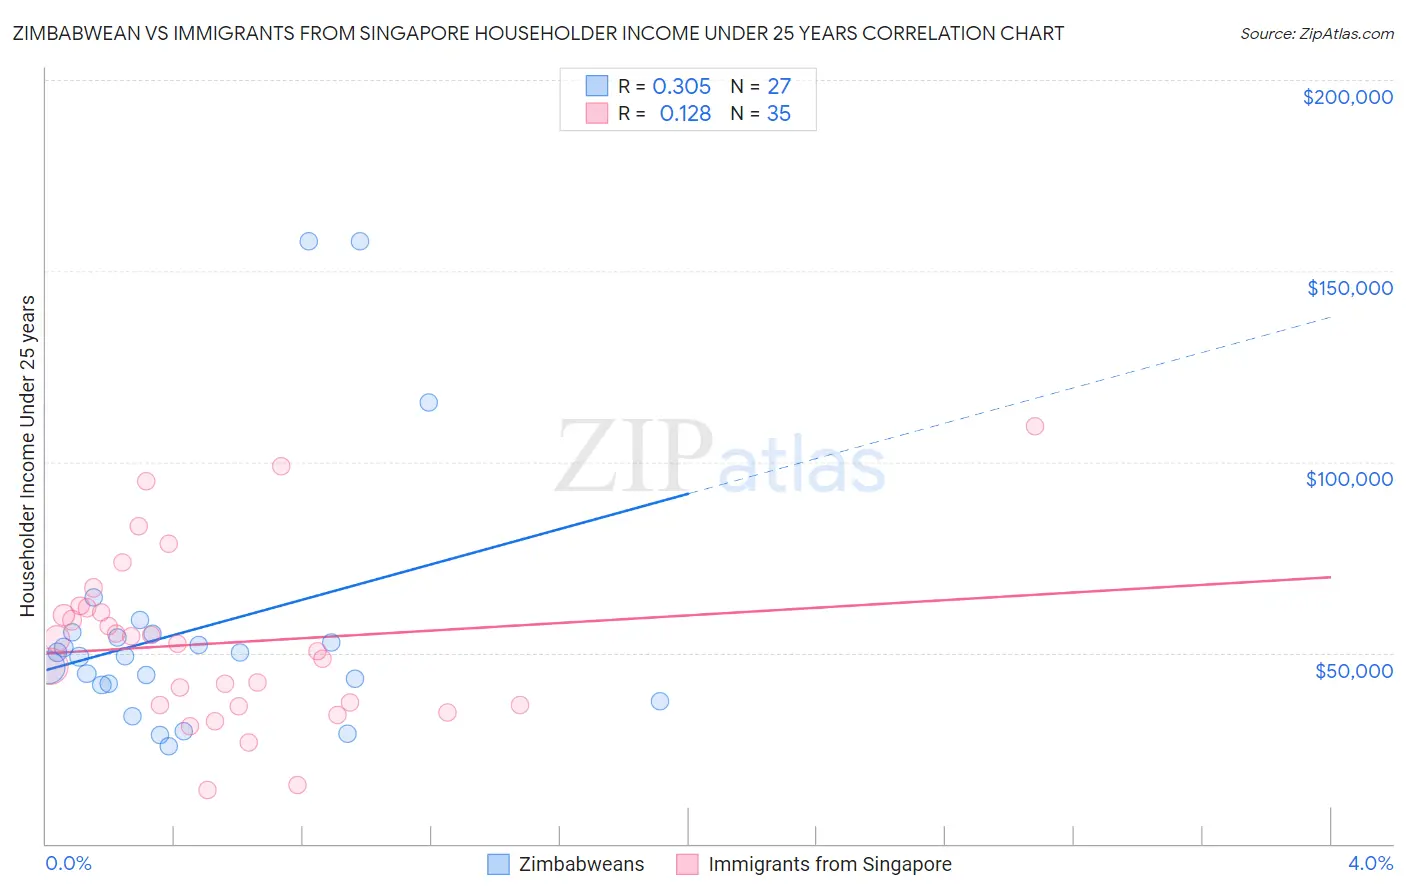 Zimbabwean vs Immigrants from Singapore Householder Income Under 25 years